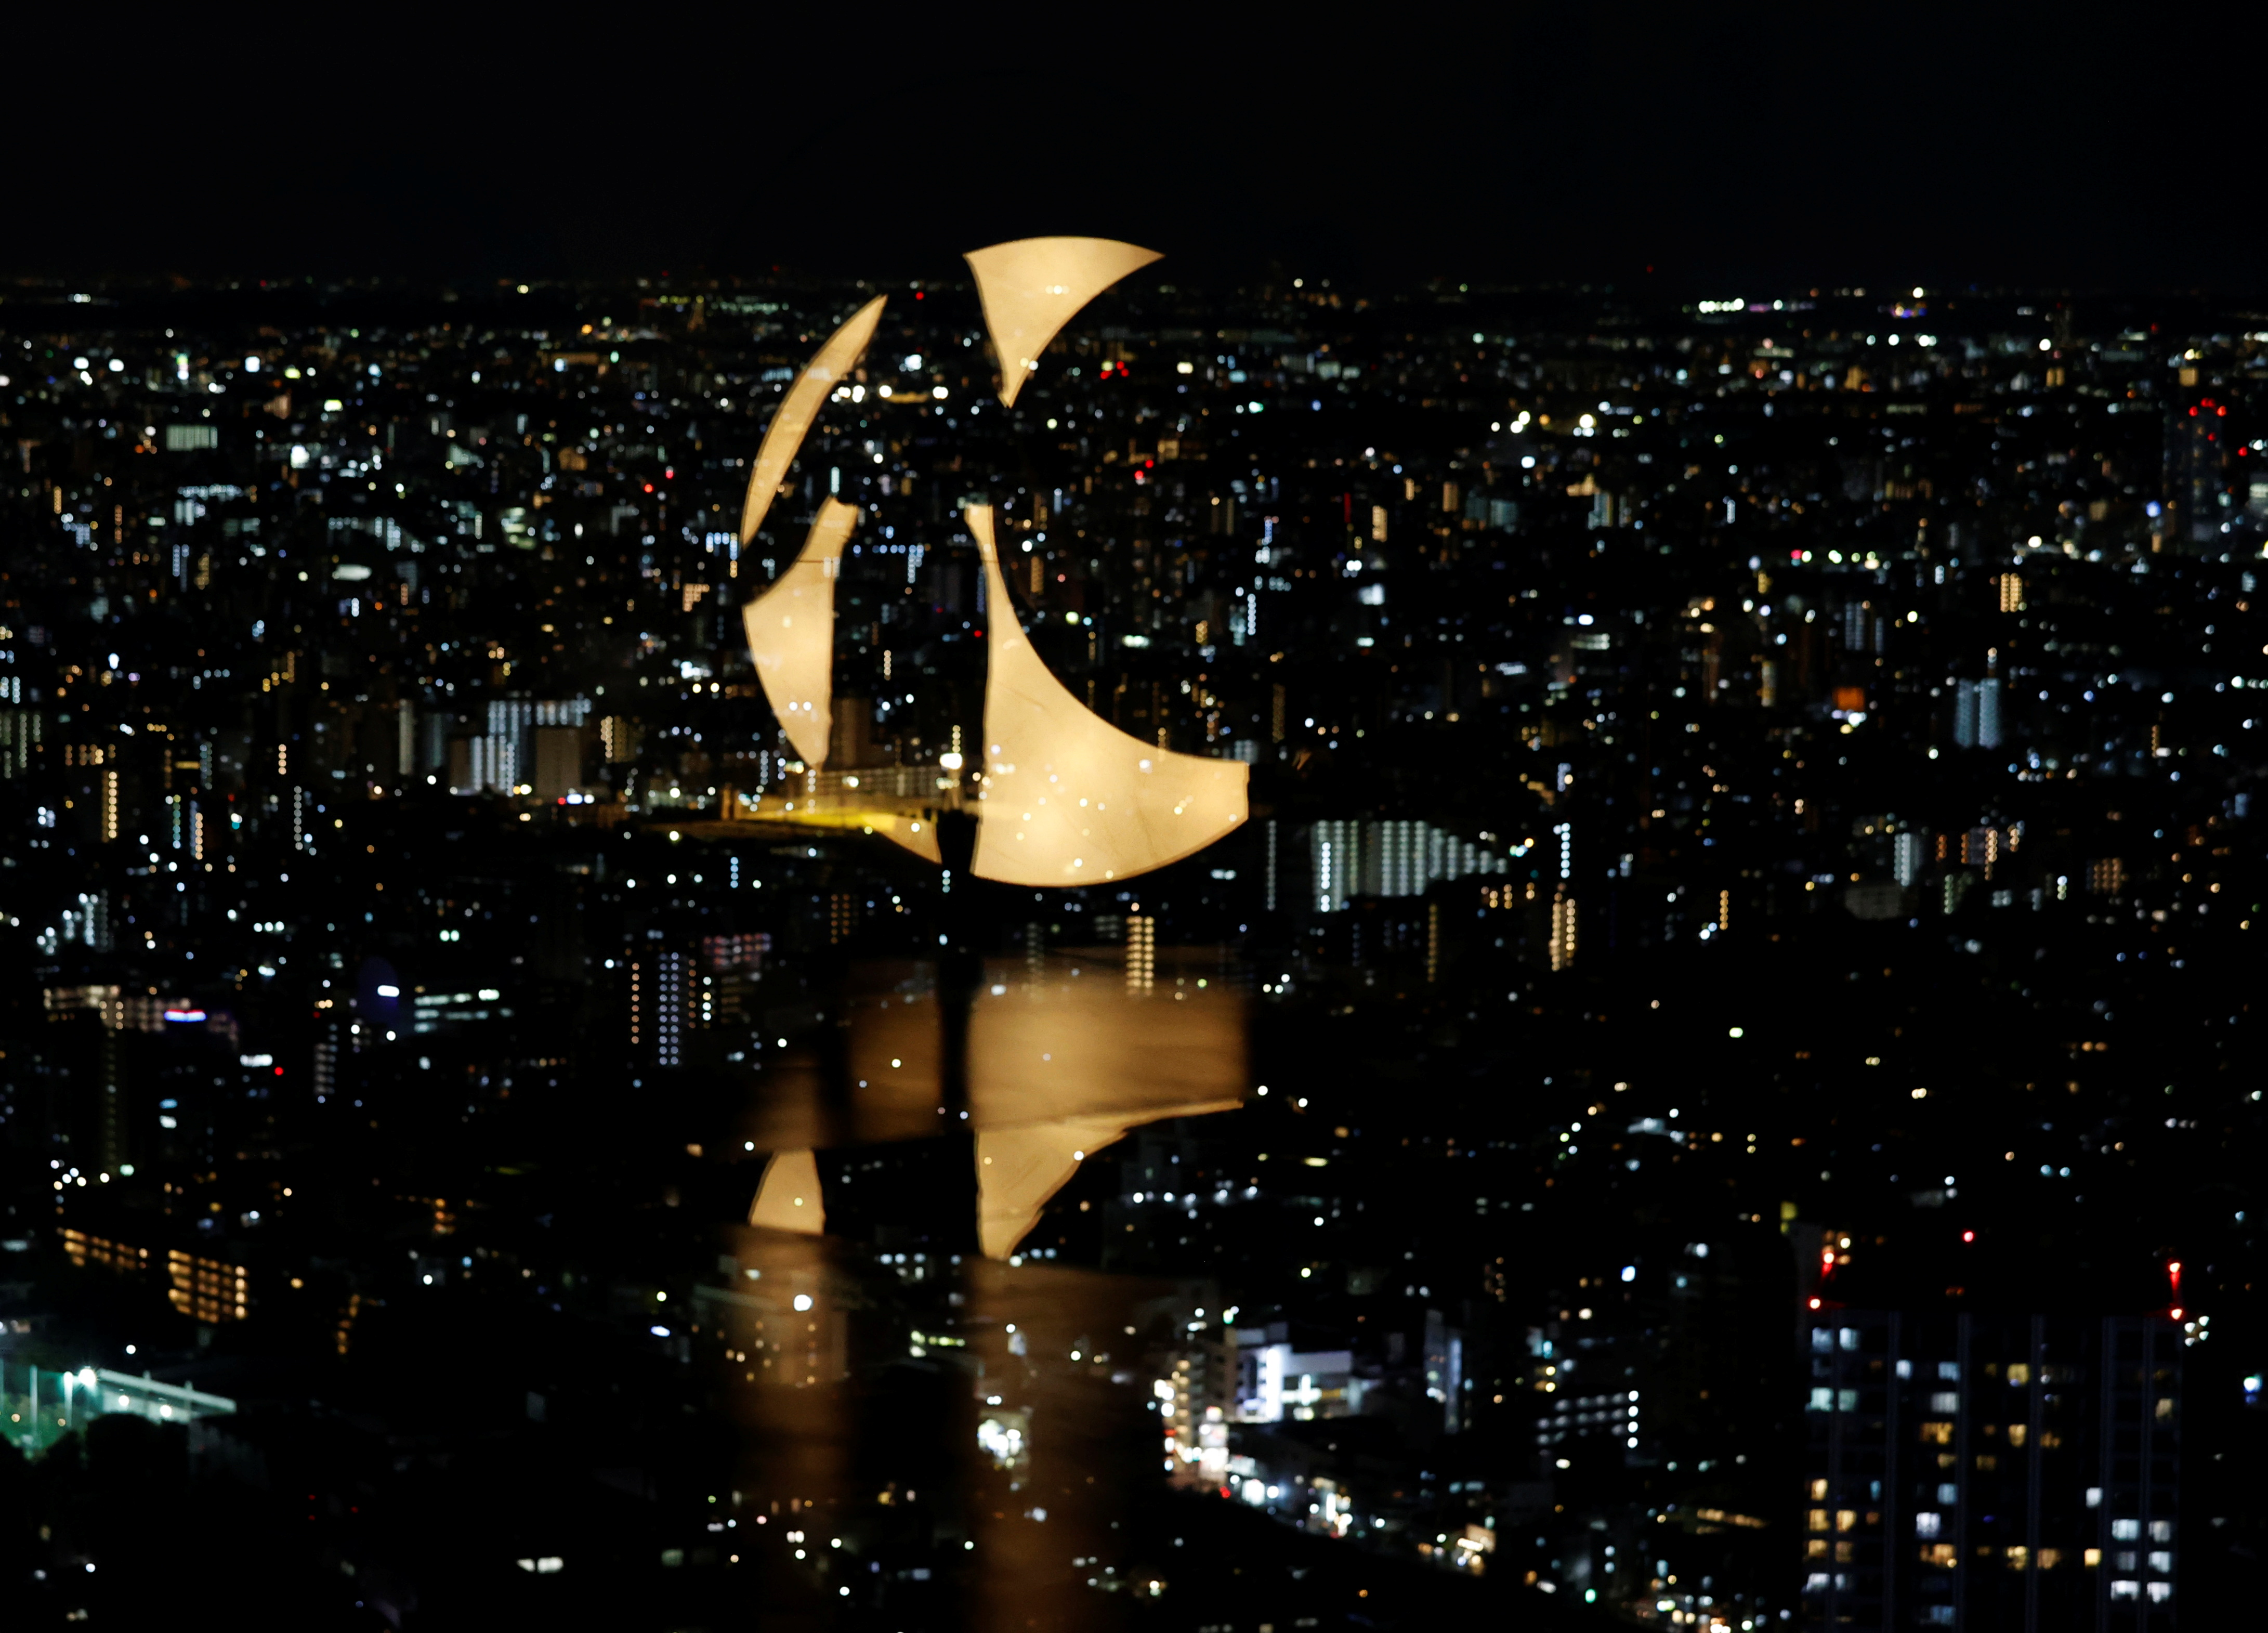 A visitor and moon-shaped light are reflected on a window at Sunshine City's Observatory after COVID-19 controls were eased, in Tokyo, Japan, October 15, 2021. REUTERS/Kim Kyung-Hoon